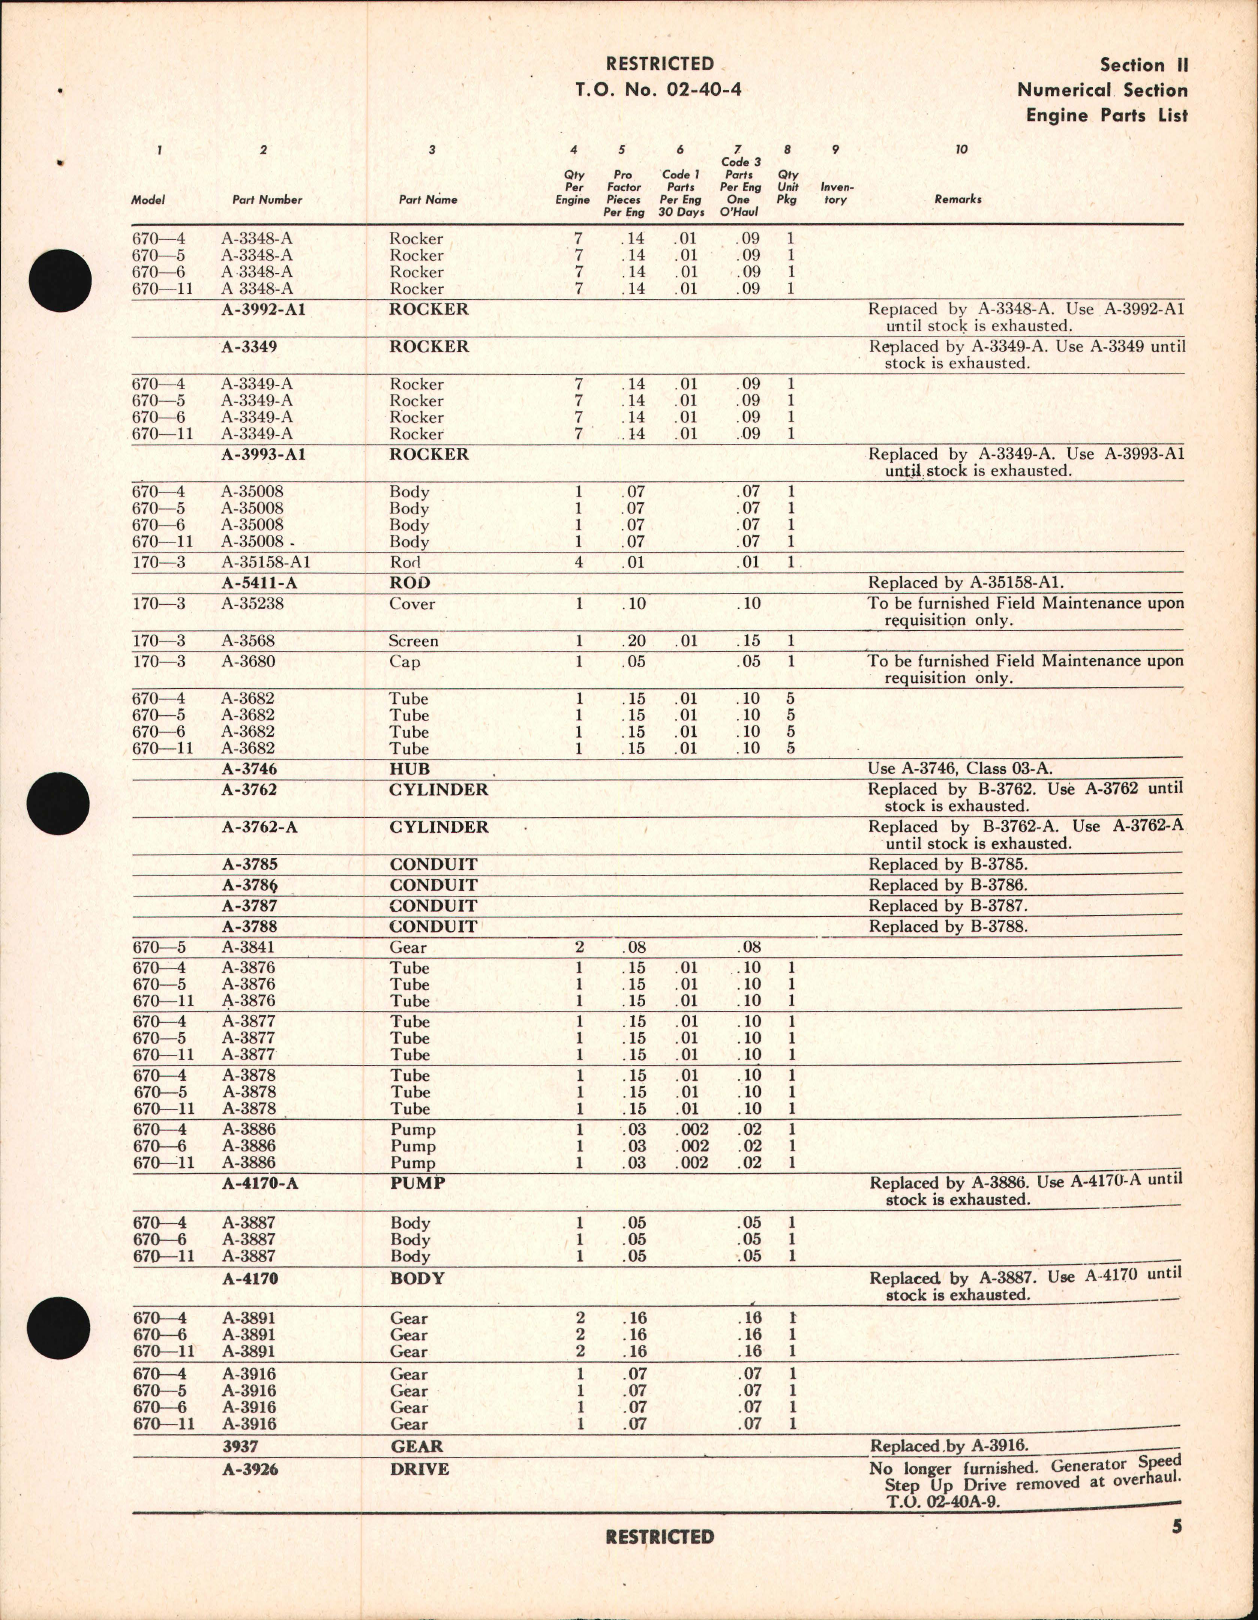 Sample page 7 from AirCorps Library document: Master Interchangeable Parts List & Requisitioning Guide for O-170-3, R-670-4, R-670-5, R-670-6, and R-670-11 Engines